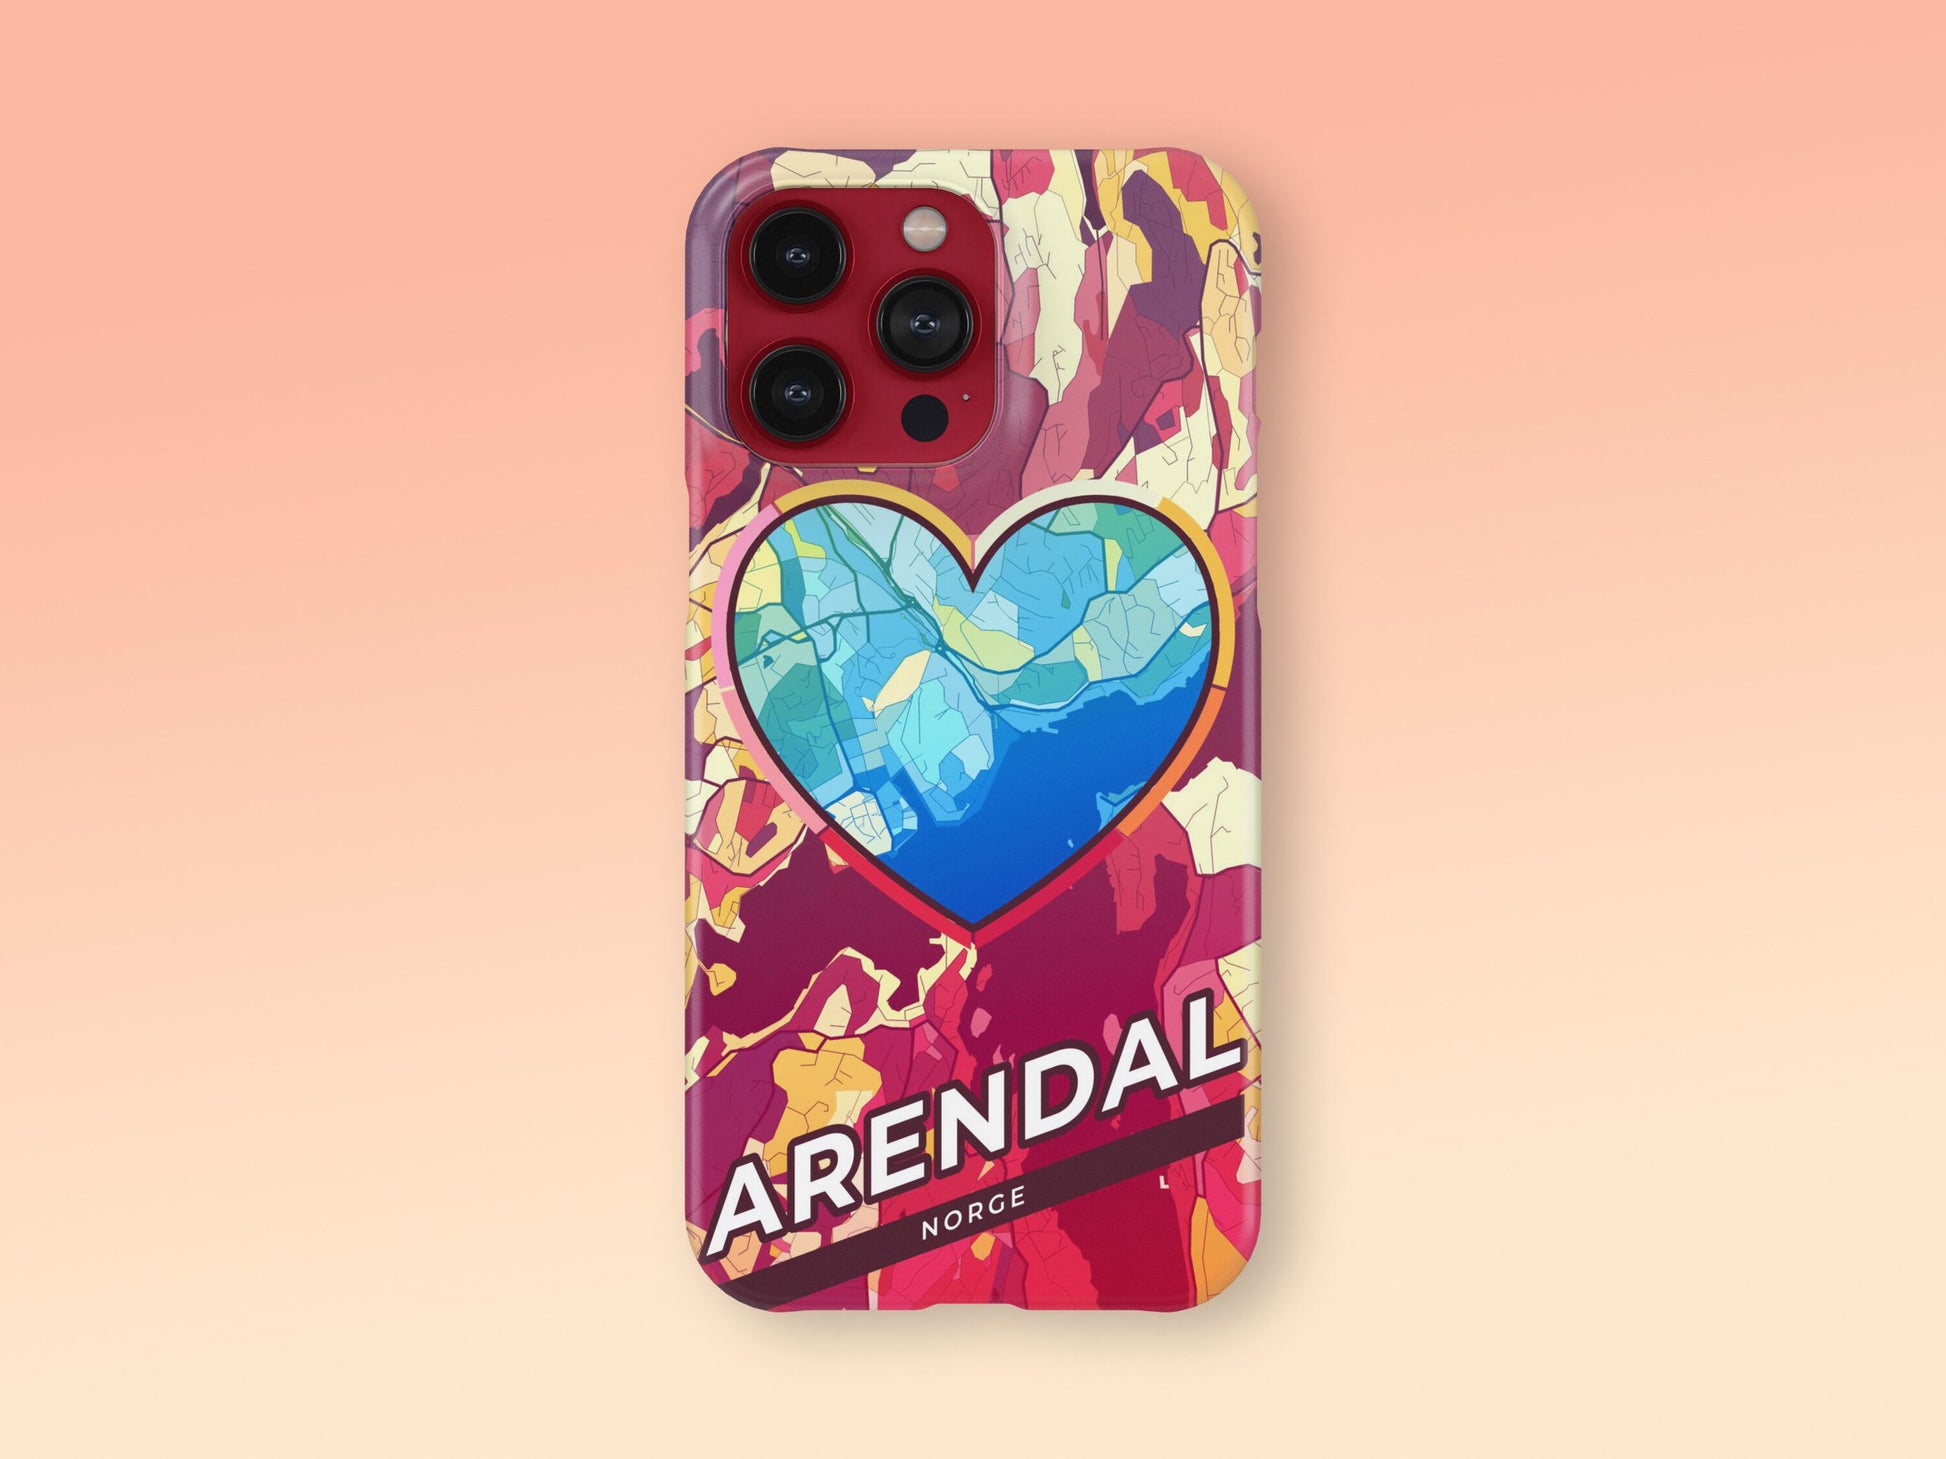 Arendal Norway slim phone case with colorful icon. Birthday, wedding or housewarming gift. Couple match cases. 2